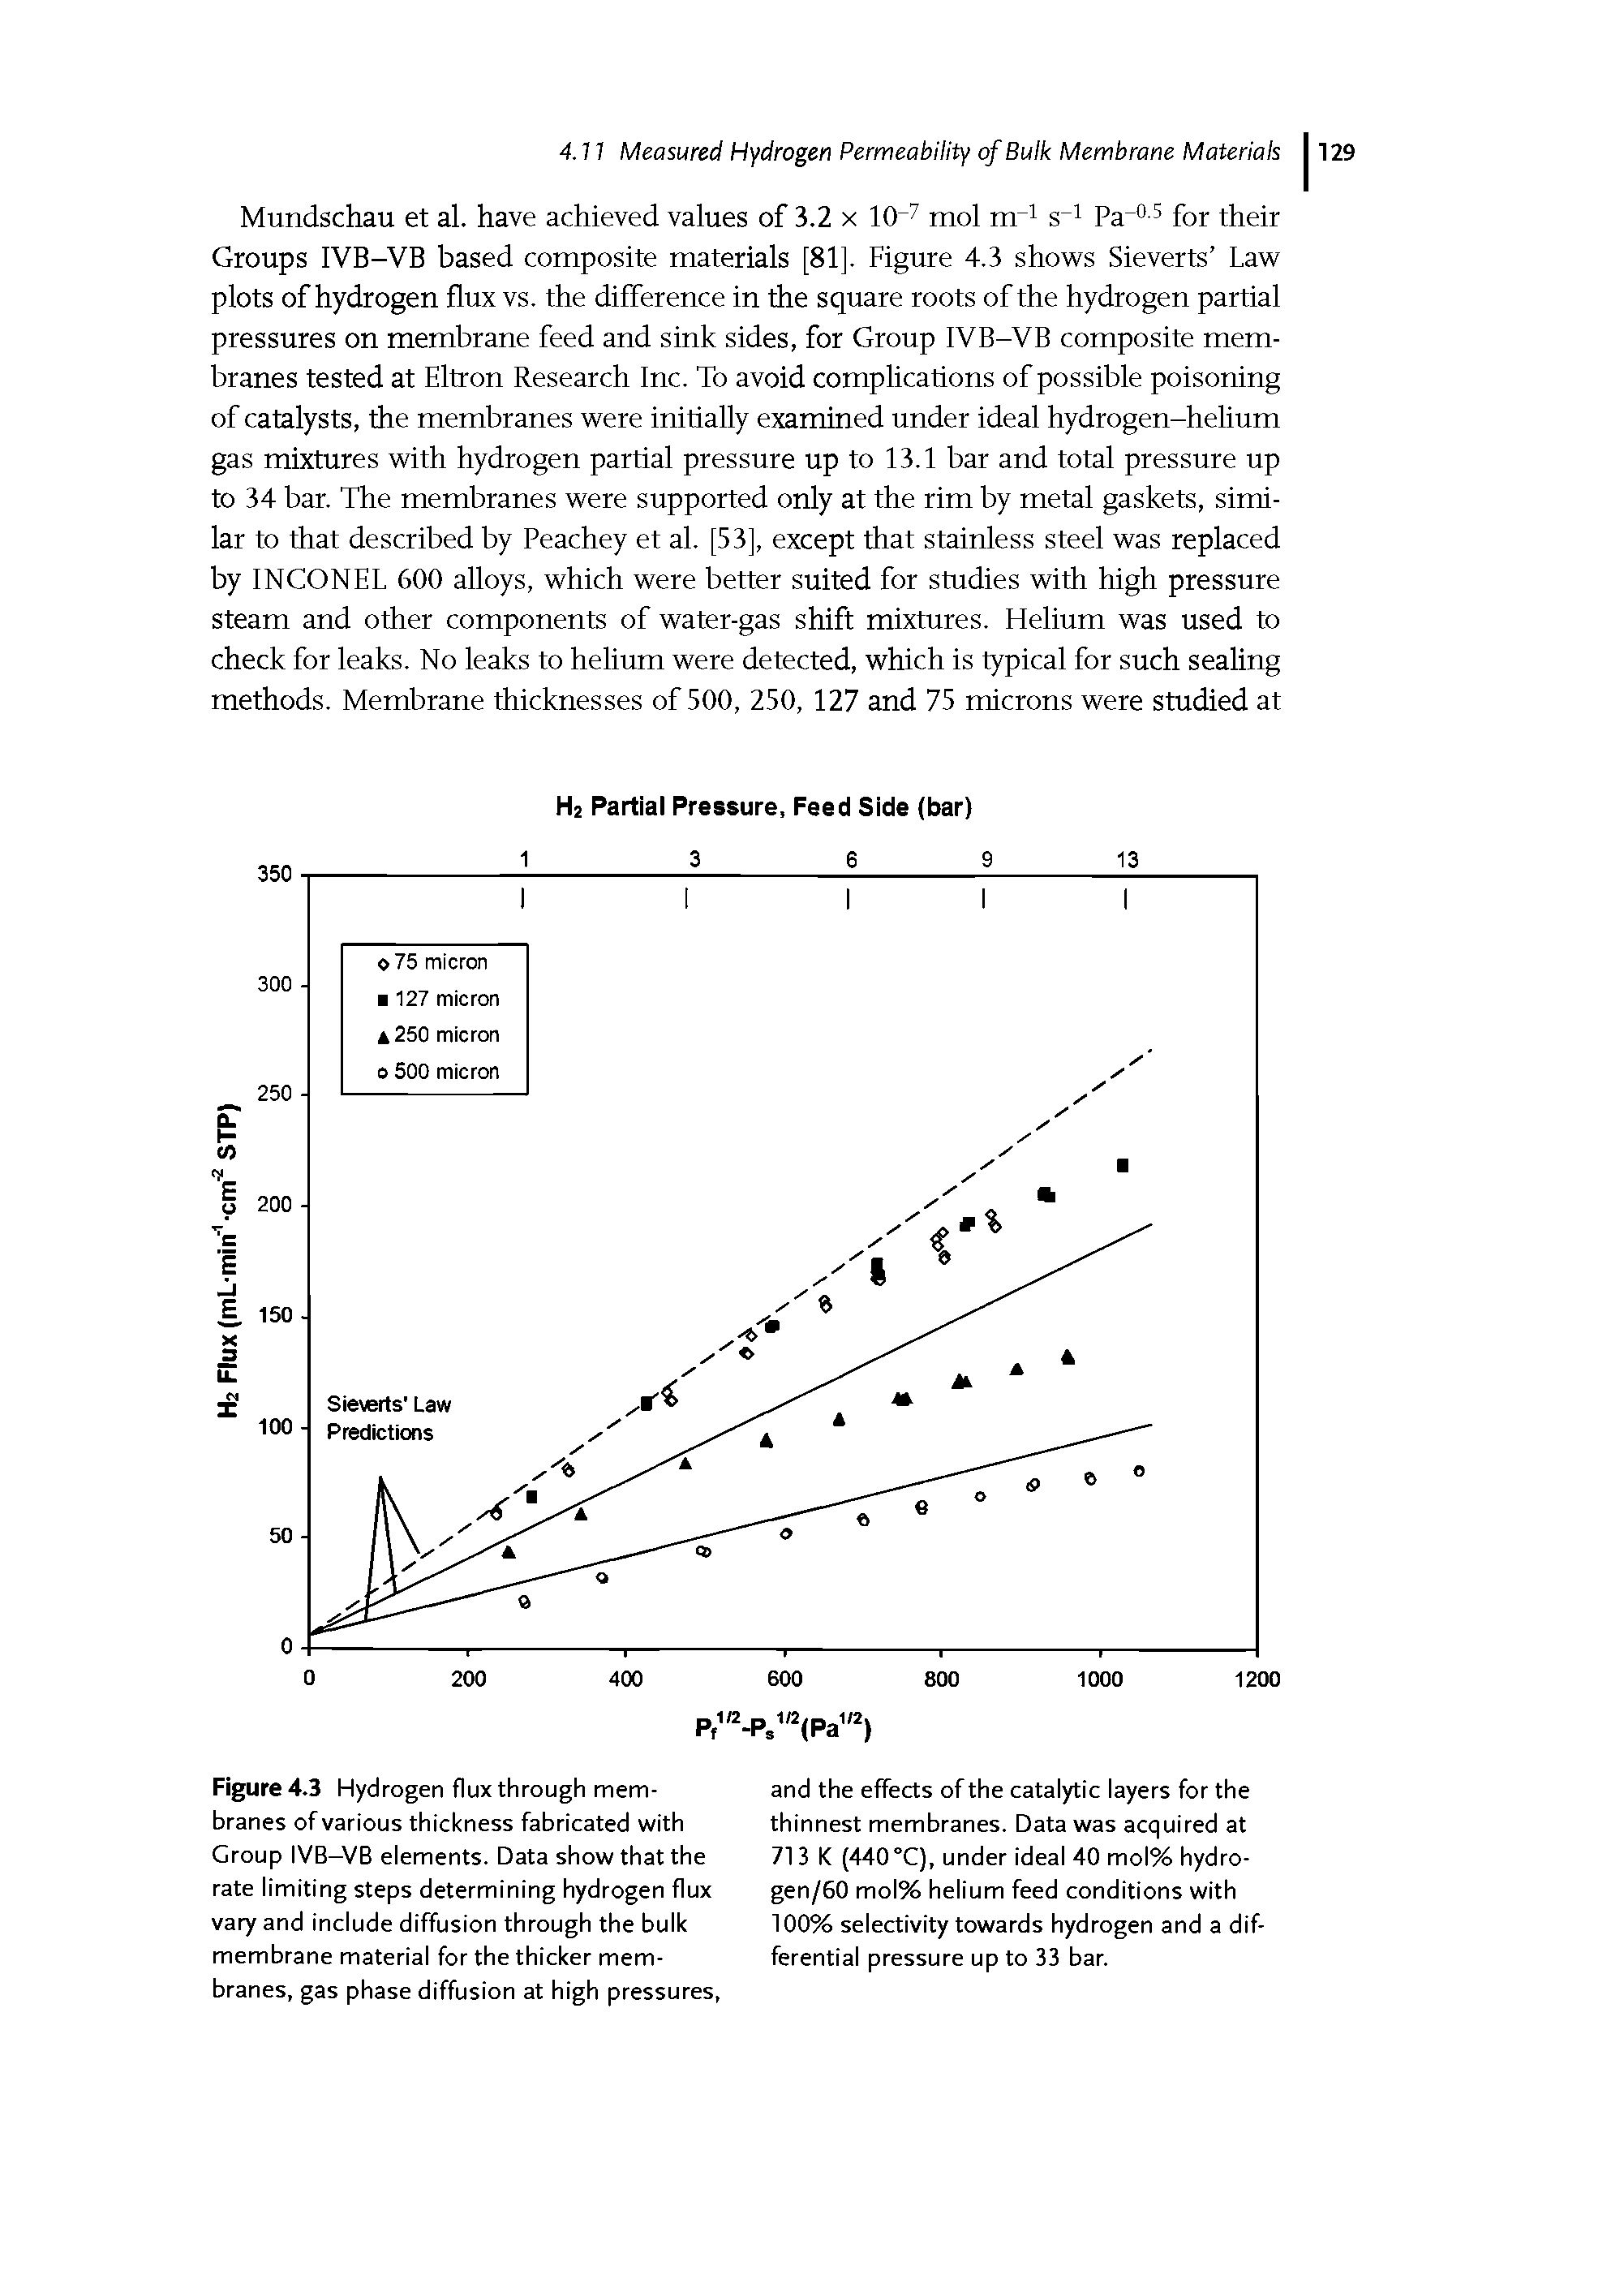 Figure 4.3 Hydrogen flux through membranes of various thickness fabricated with Group IVB-VB elements. Data show that the rate limiting steps determining hydrogen flux vary and include diffusion through the bulk membrane material for the thicker membranes, gas phase diffusion at high pressures,...